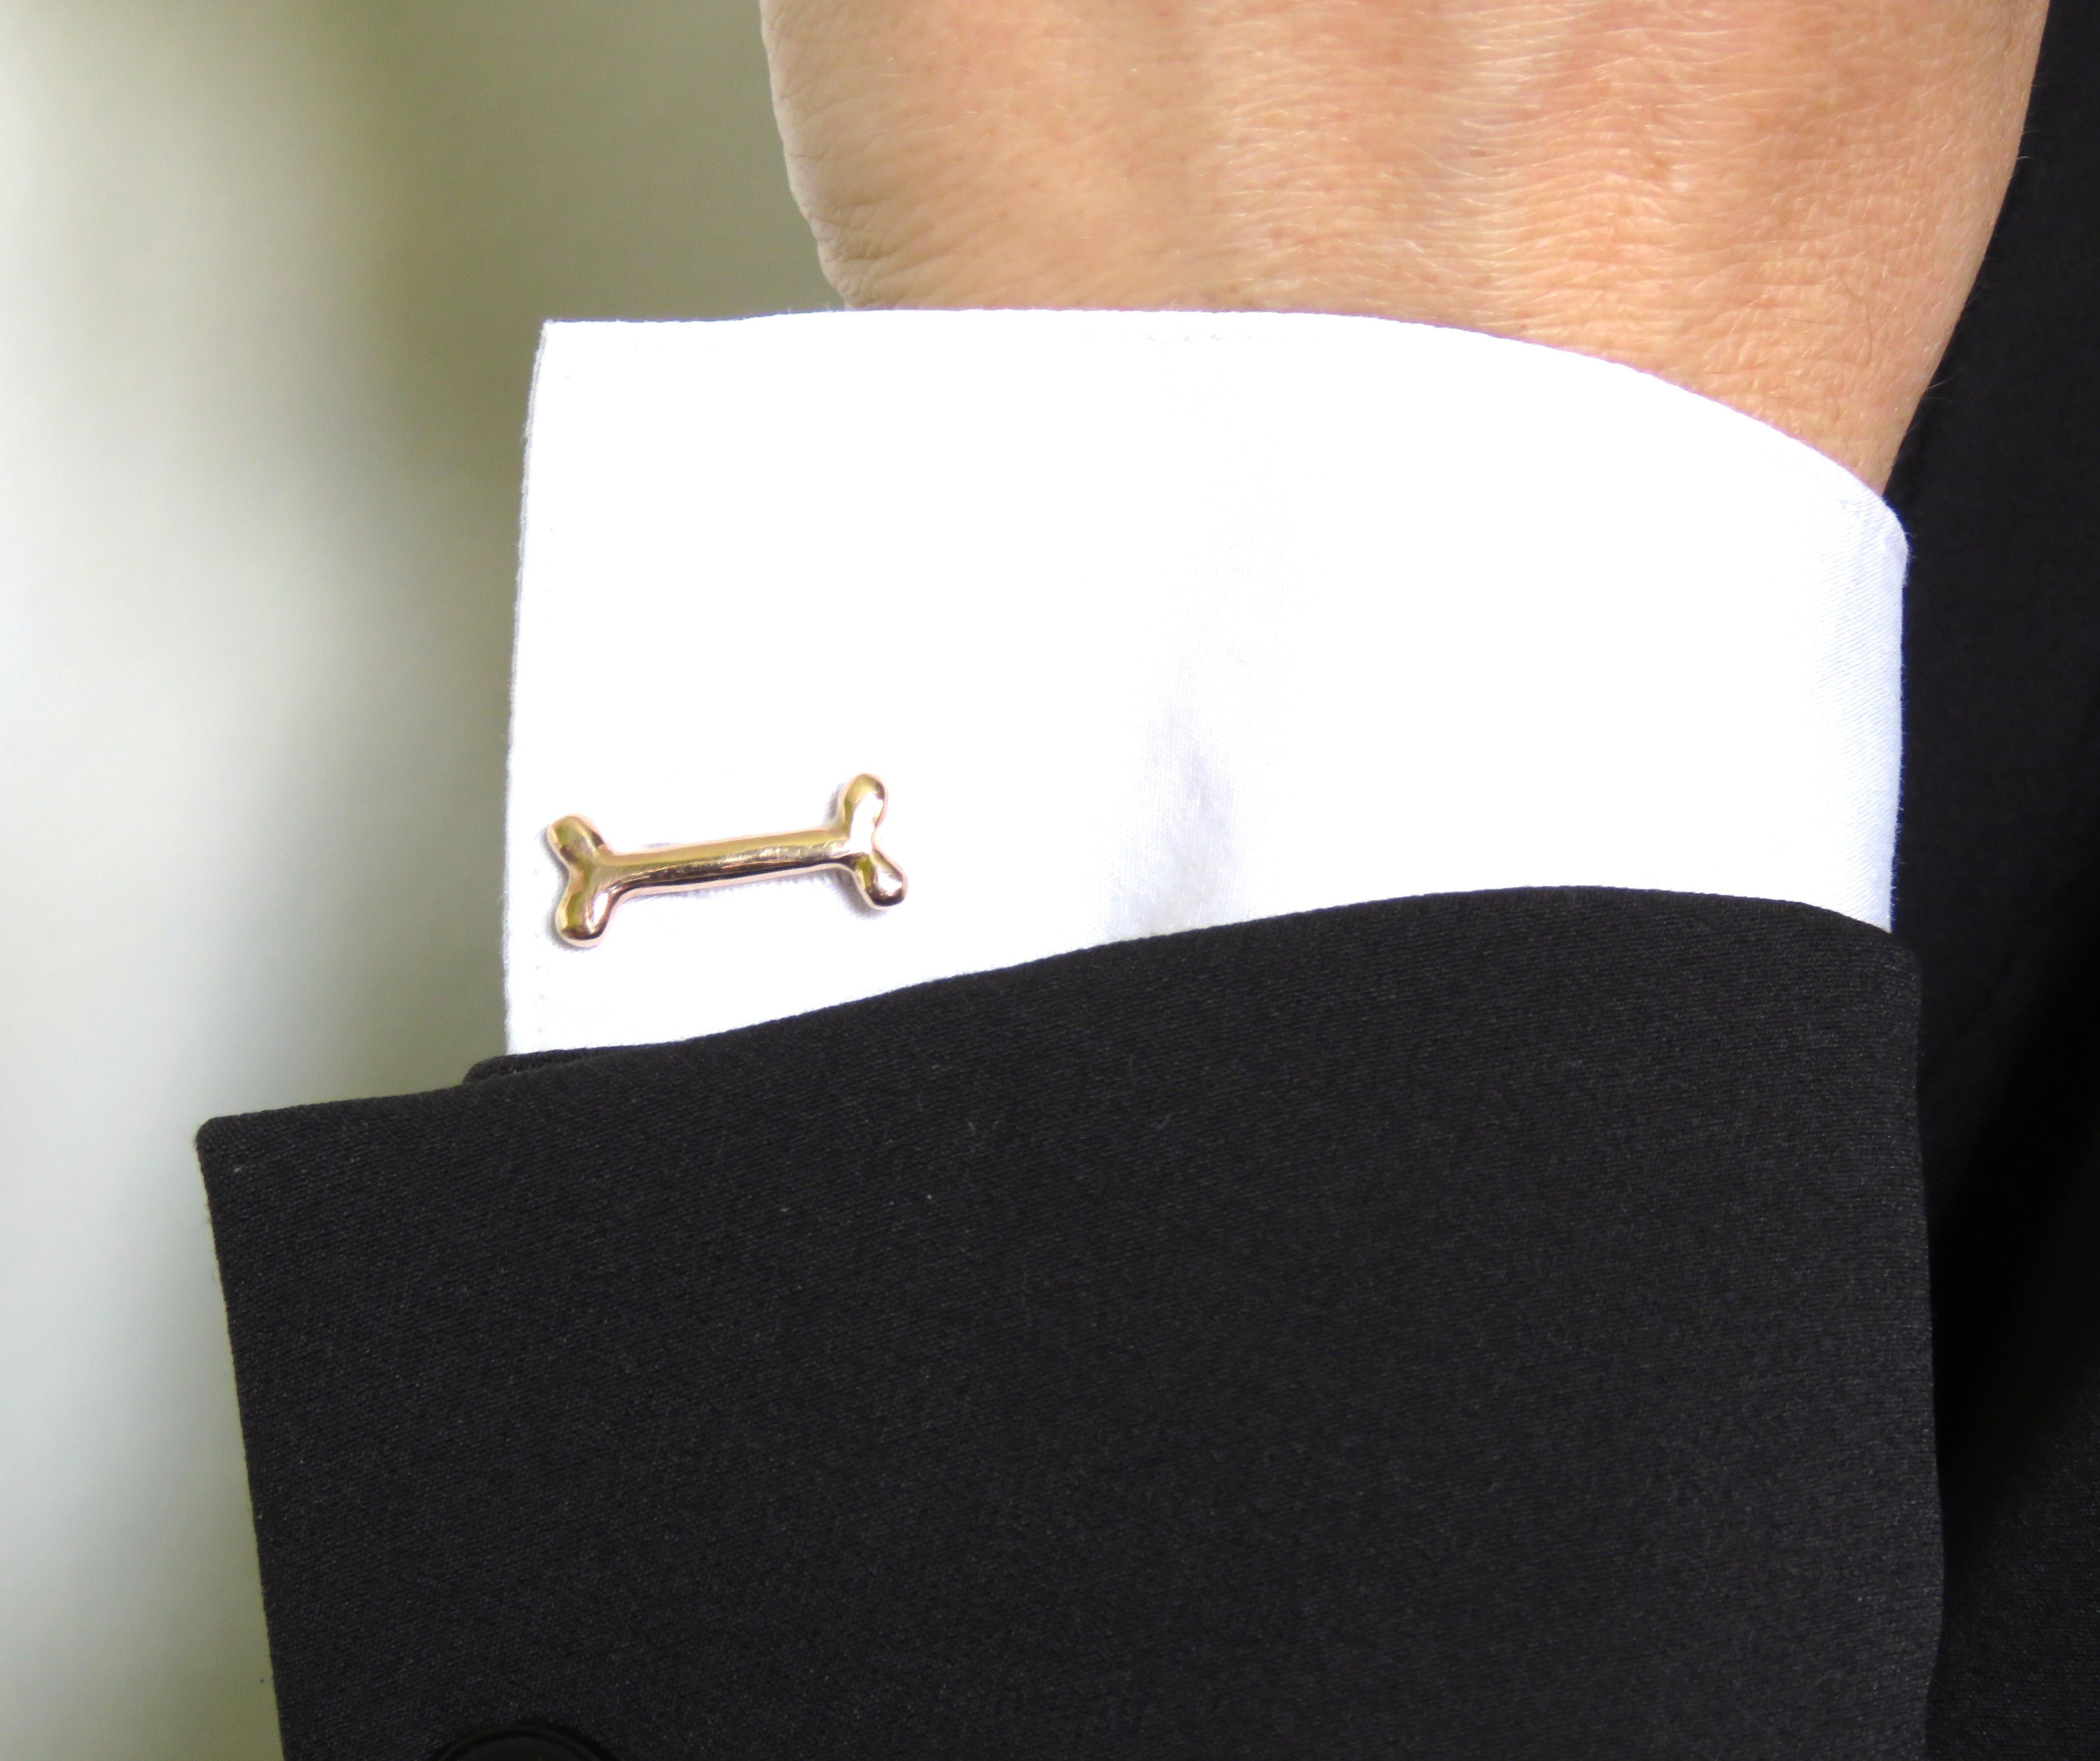 Cufflinks in 9k rose gold with two dog bone bars. Bar length is 20 millimeters / 0,78 inches.
They are stamped with the Italian Gold Mark 375 - 716MI and handcrafted in Italy by Botta